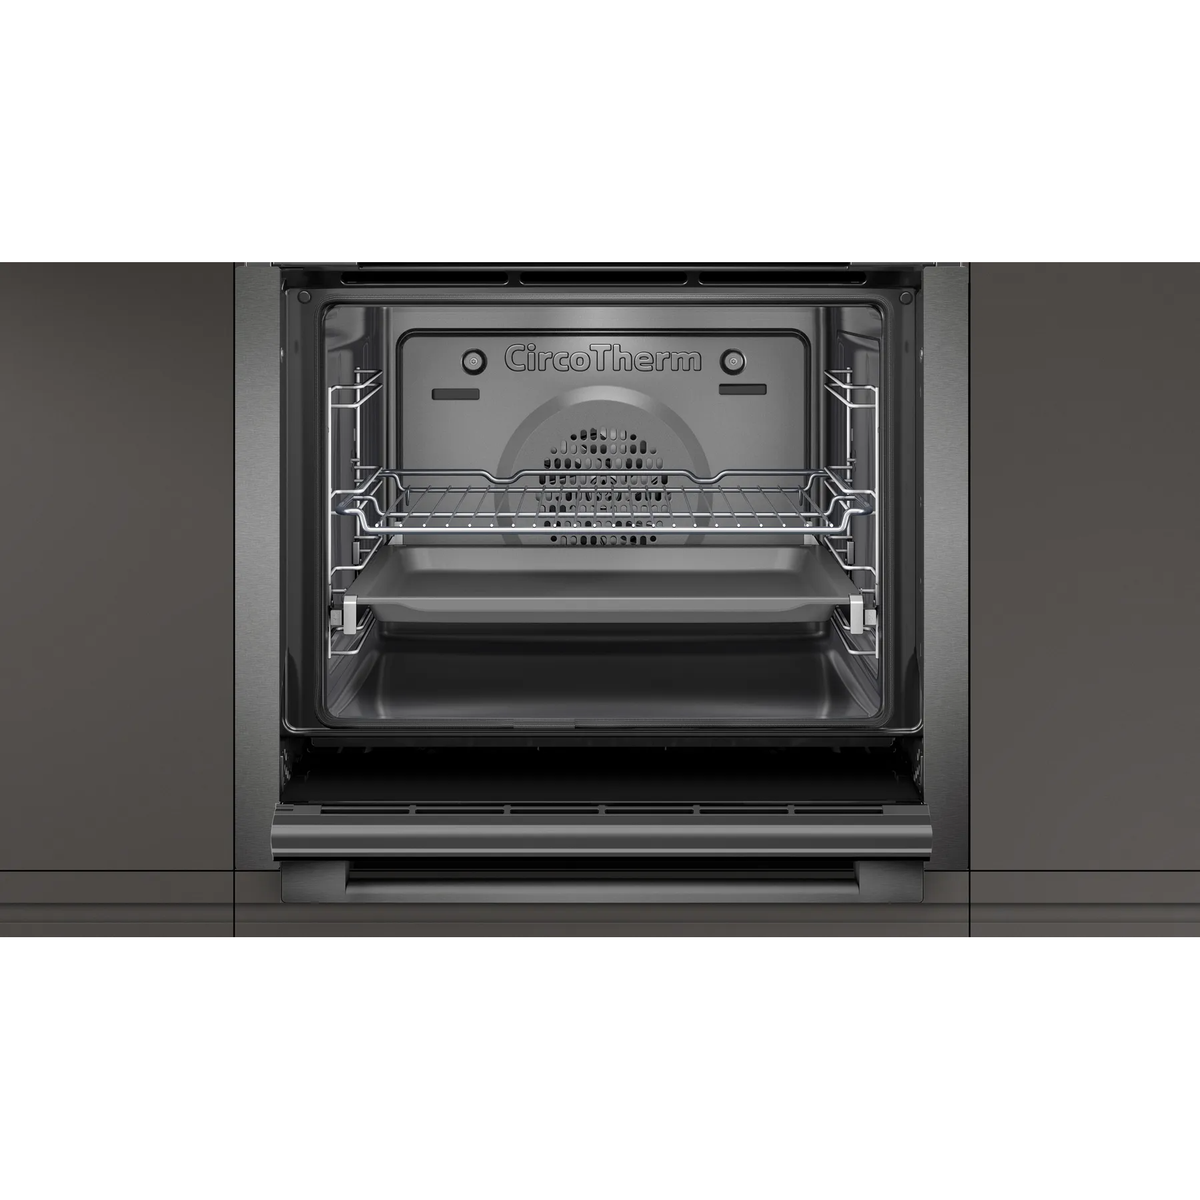 Neff N50 71L Built-In Electric Single Oven - Graphite Grey | B6ACH7HG0B from Neff - DID Electrical